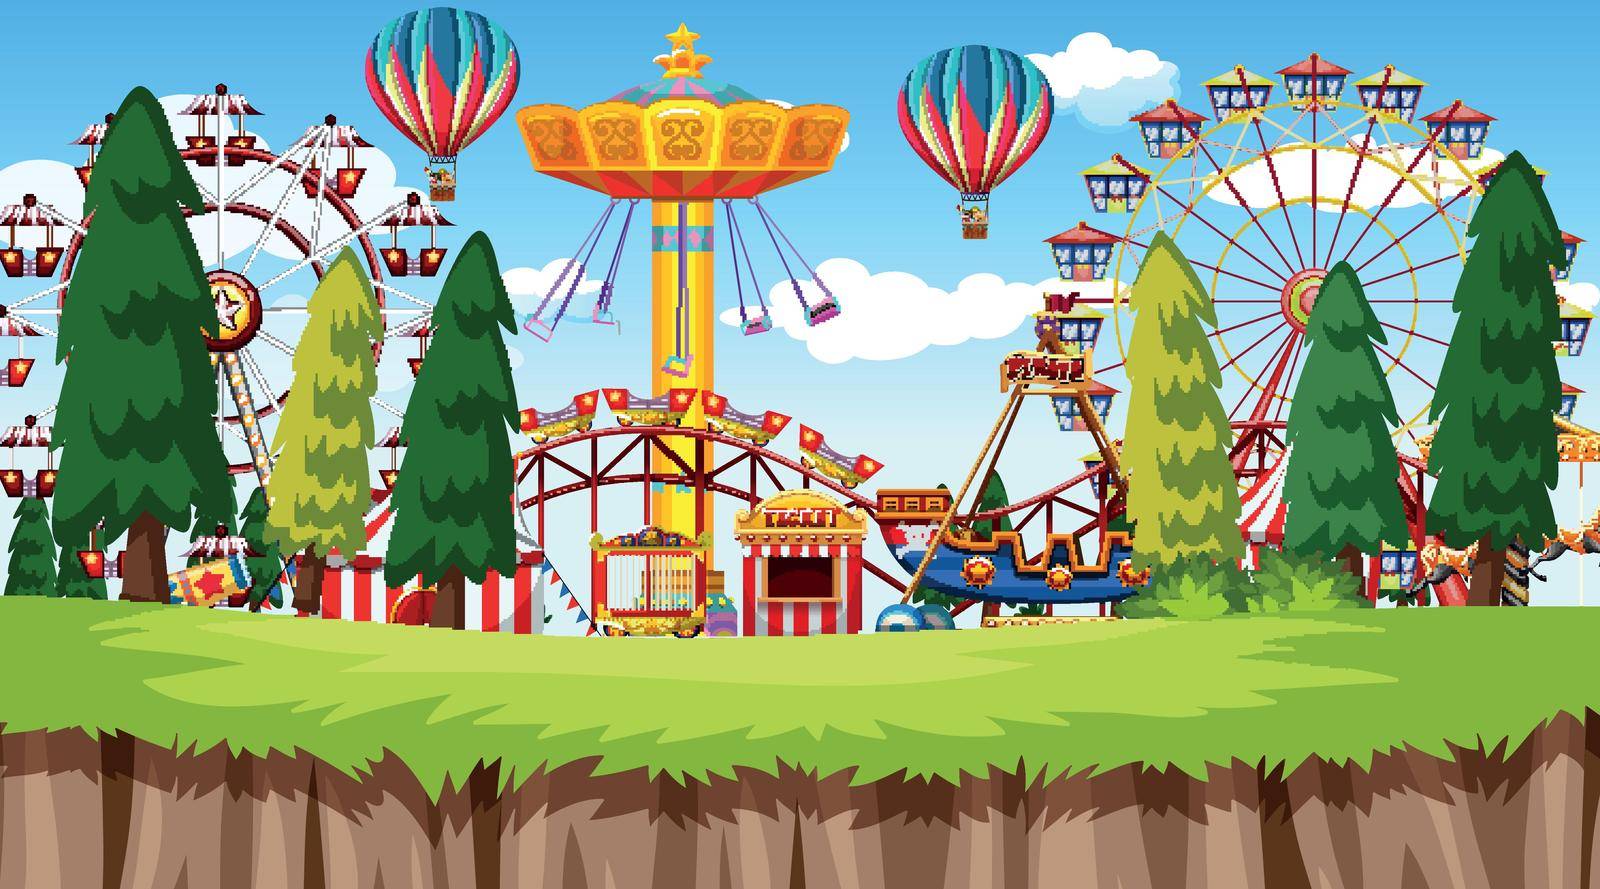 illustration of an outdoor scene with empty amusement park